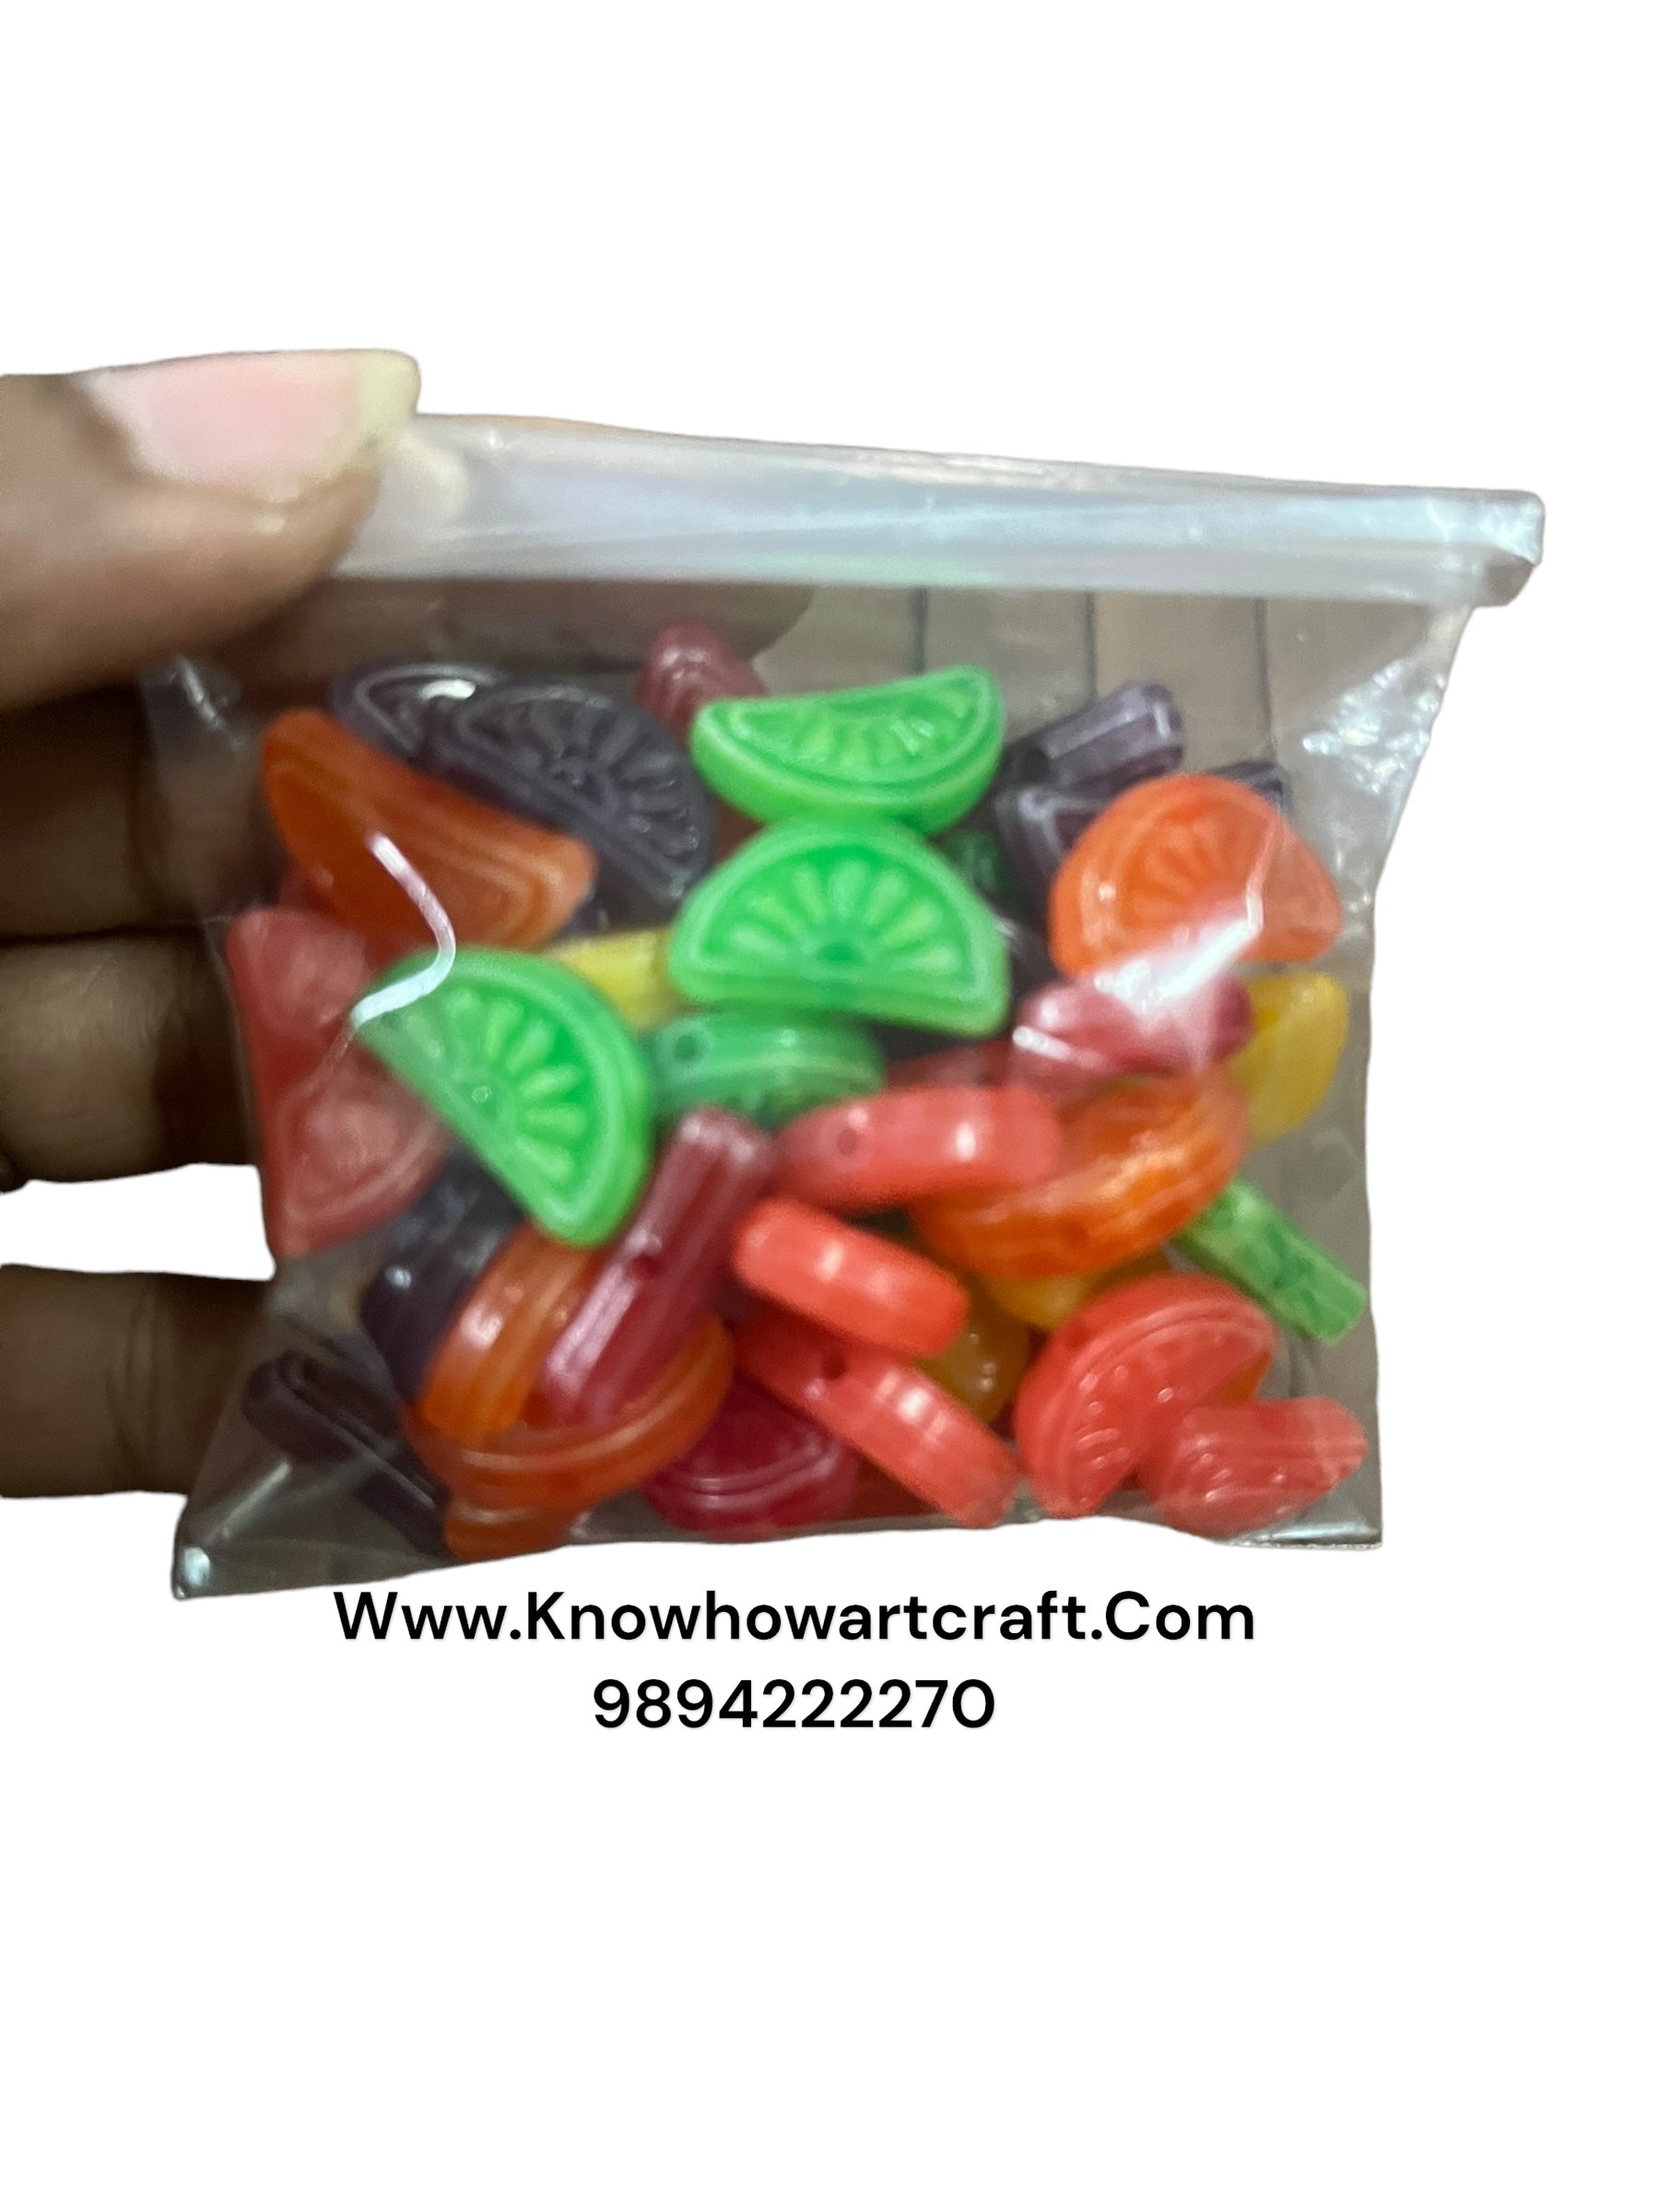 Tofee beads 50g in a pack